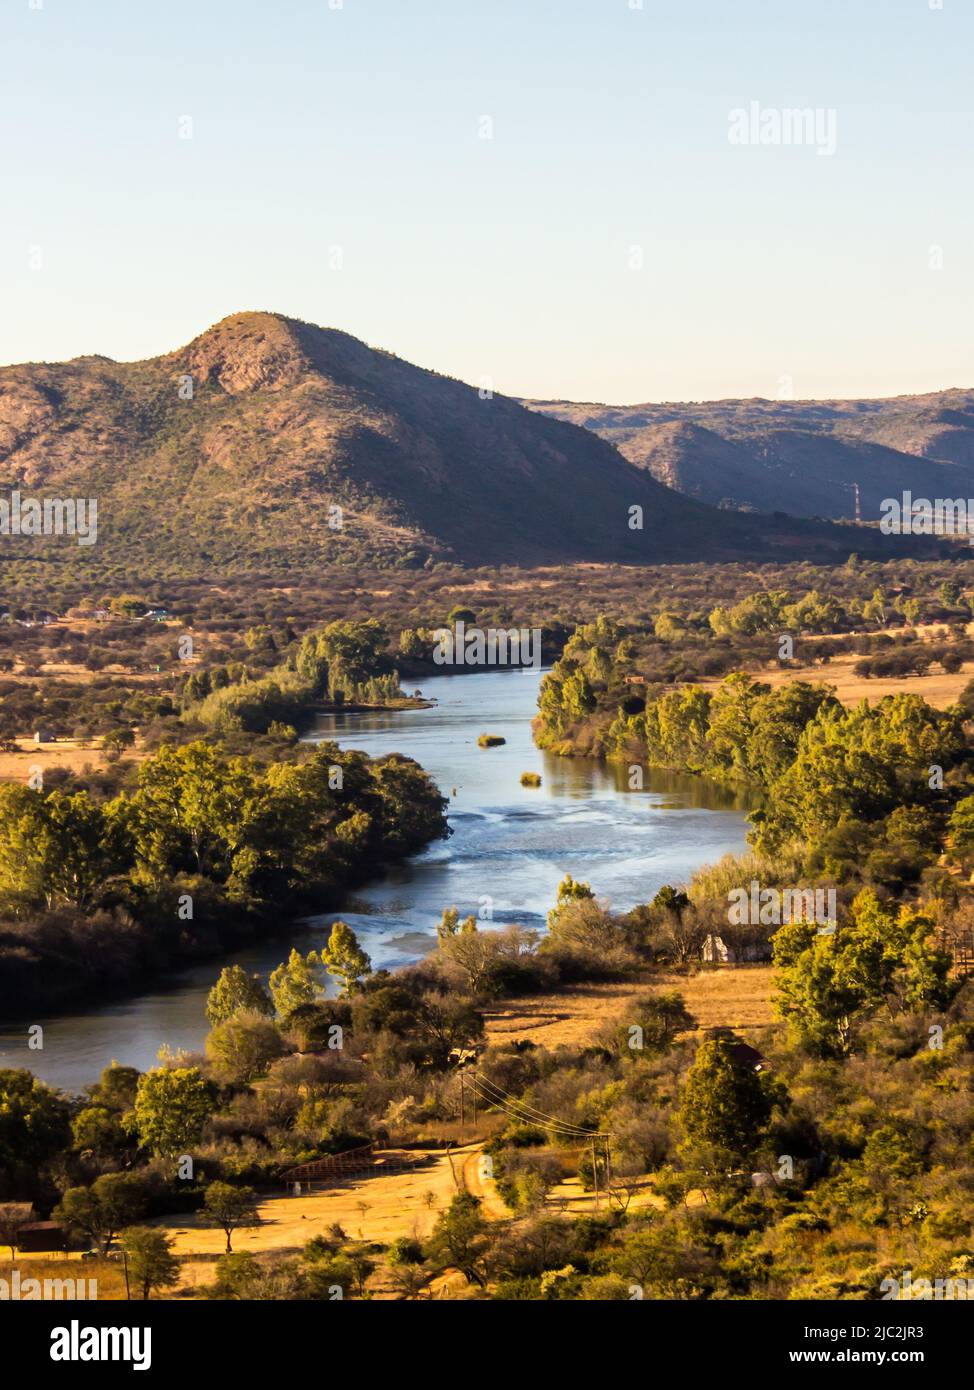 View over the Vaal River where it flows through the undulating hills of the Vredefort Dome, in South Africa Stock Photo